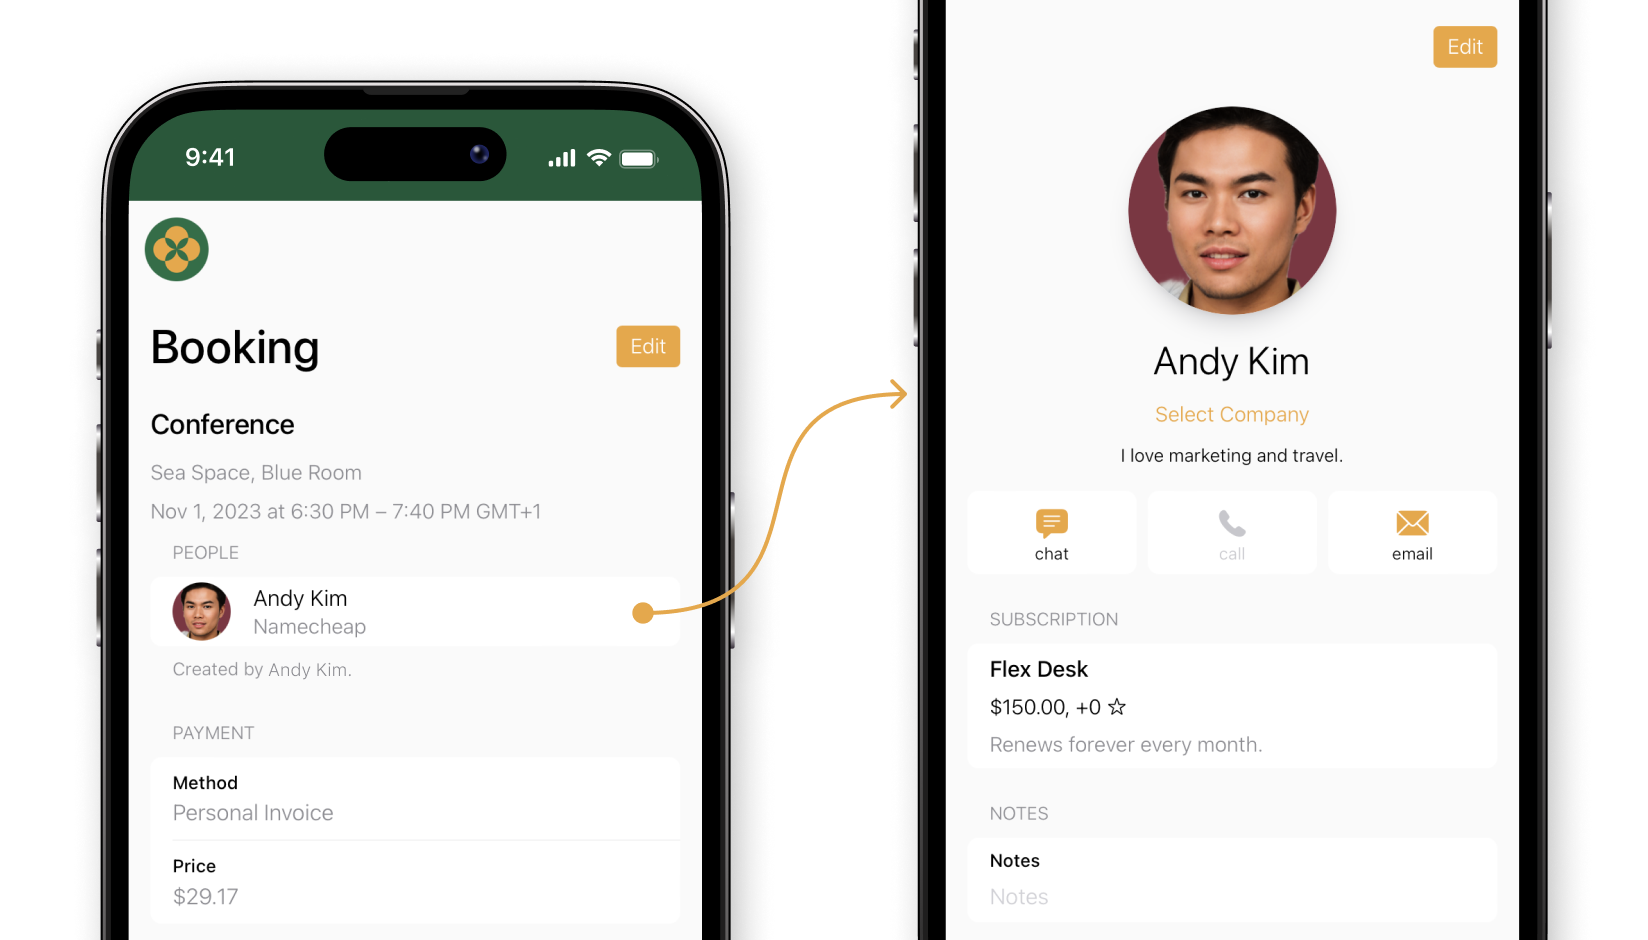 Improved Navigation to User Profiles